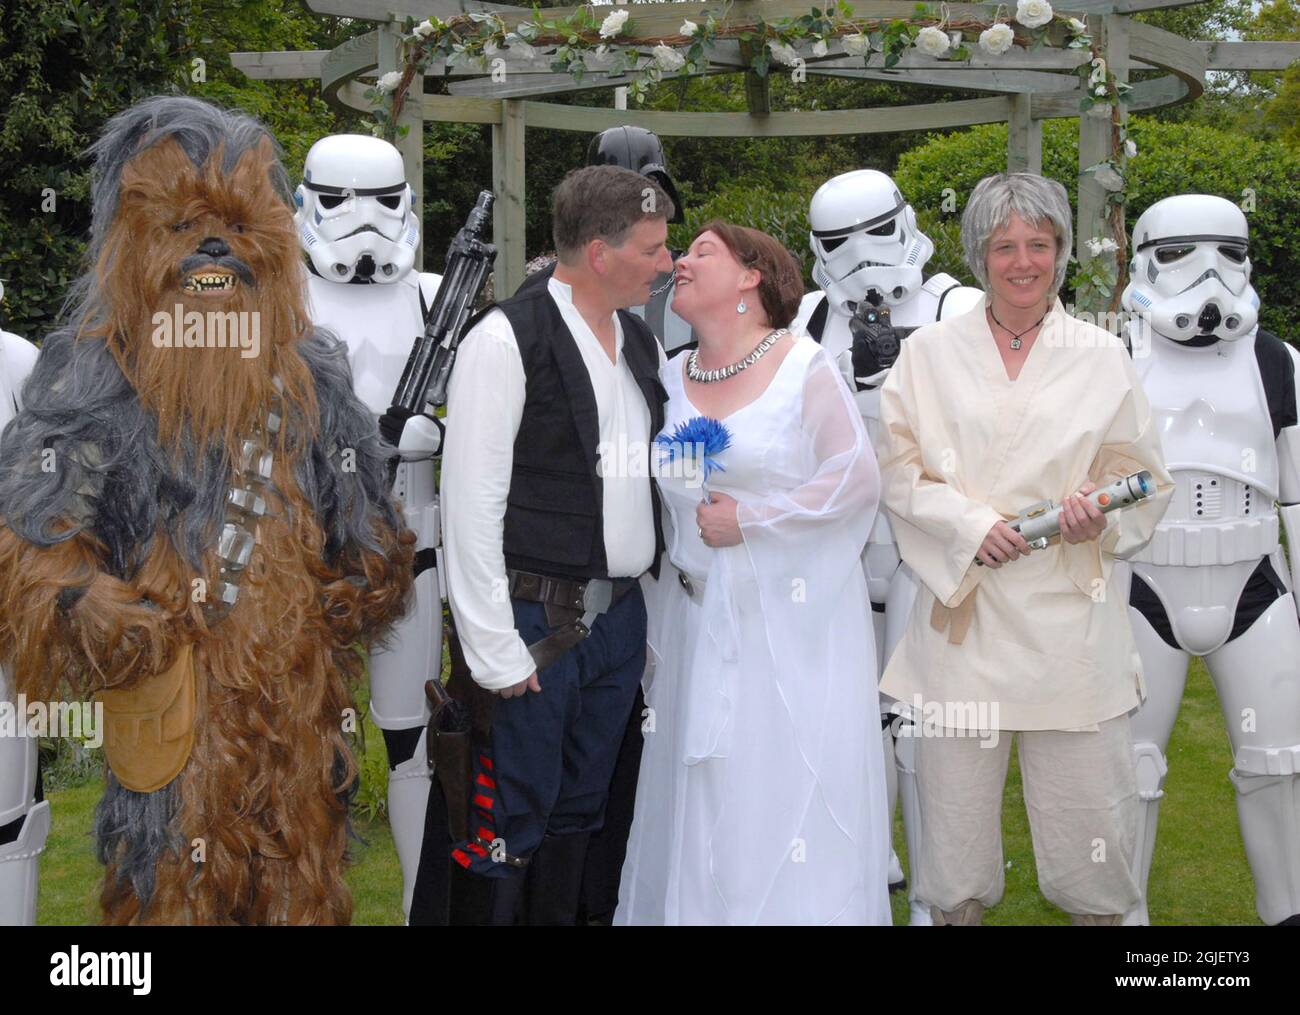 DUNCAN THOMPSON AND BRIDE SAMMI GARDINER WITH GUESTS AT THEIR STAR WARS  WEDDING ON THE ISLE OF WIGHT. PIC MIKE WALKER, 2009 Stock Photo - Alamy